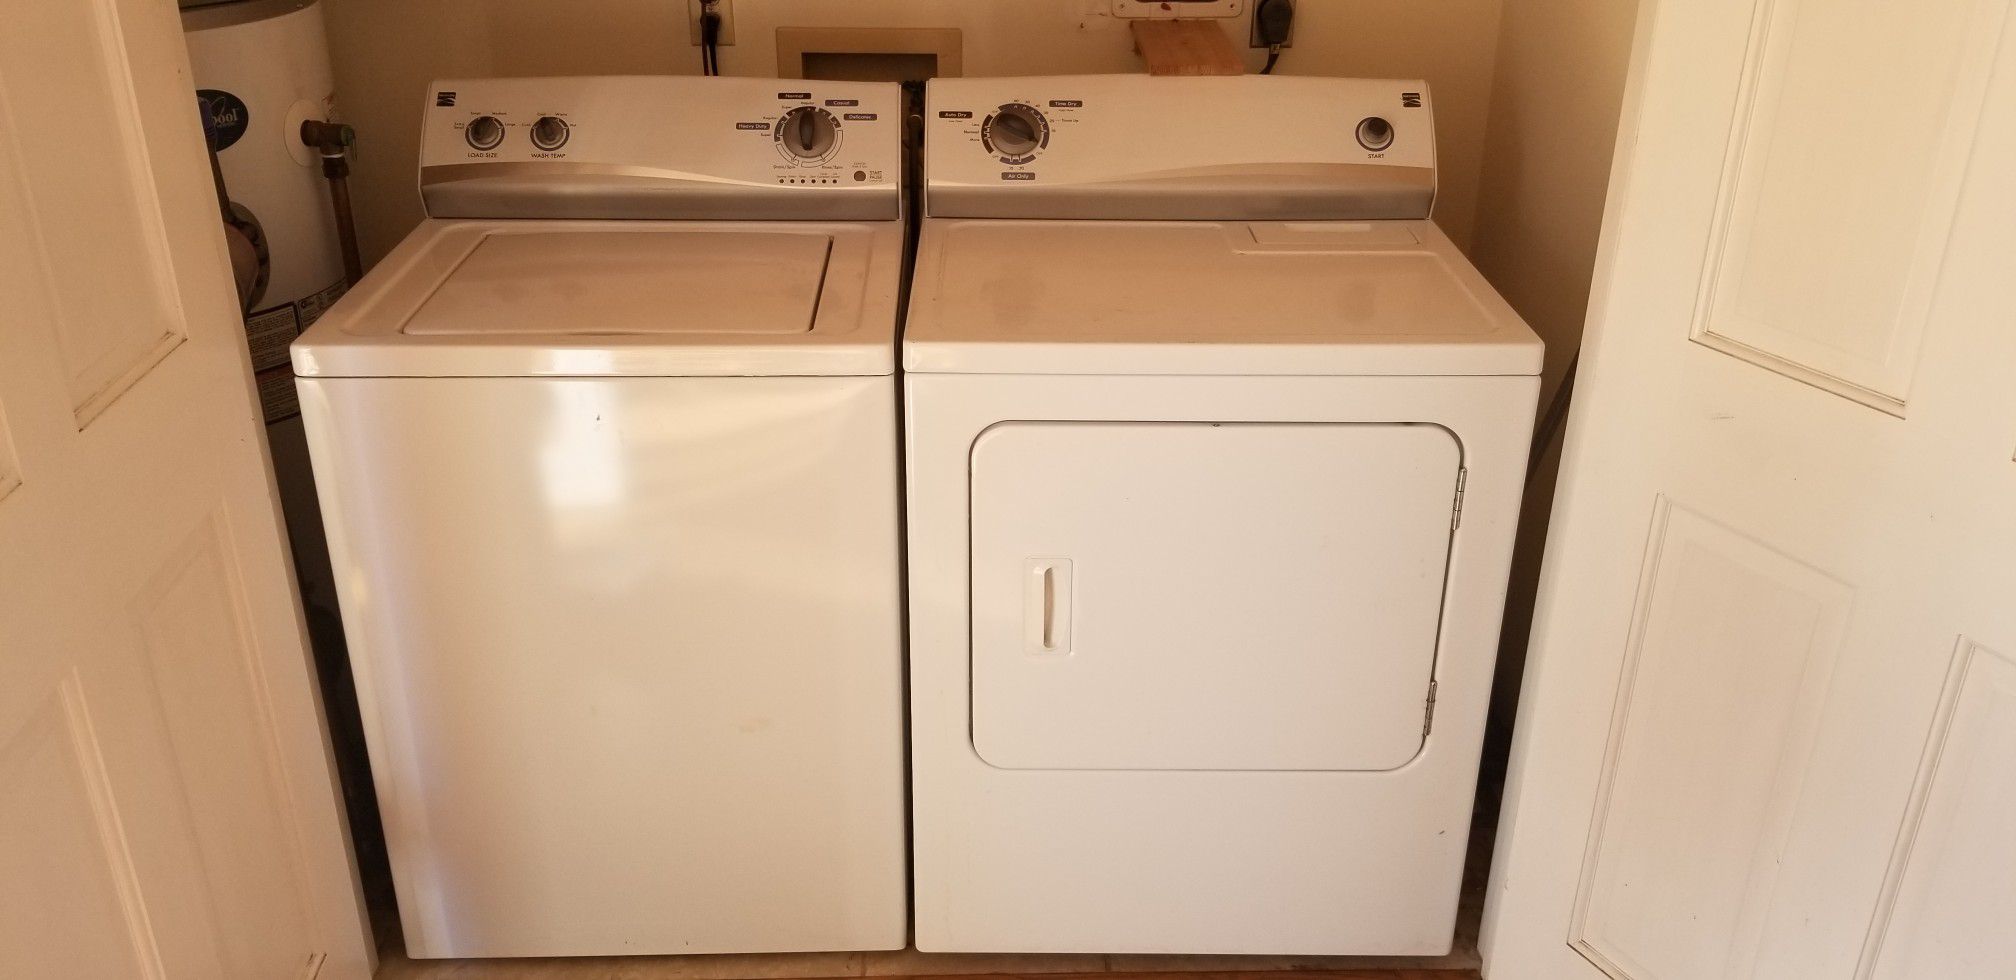 Kenmore washer dryer